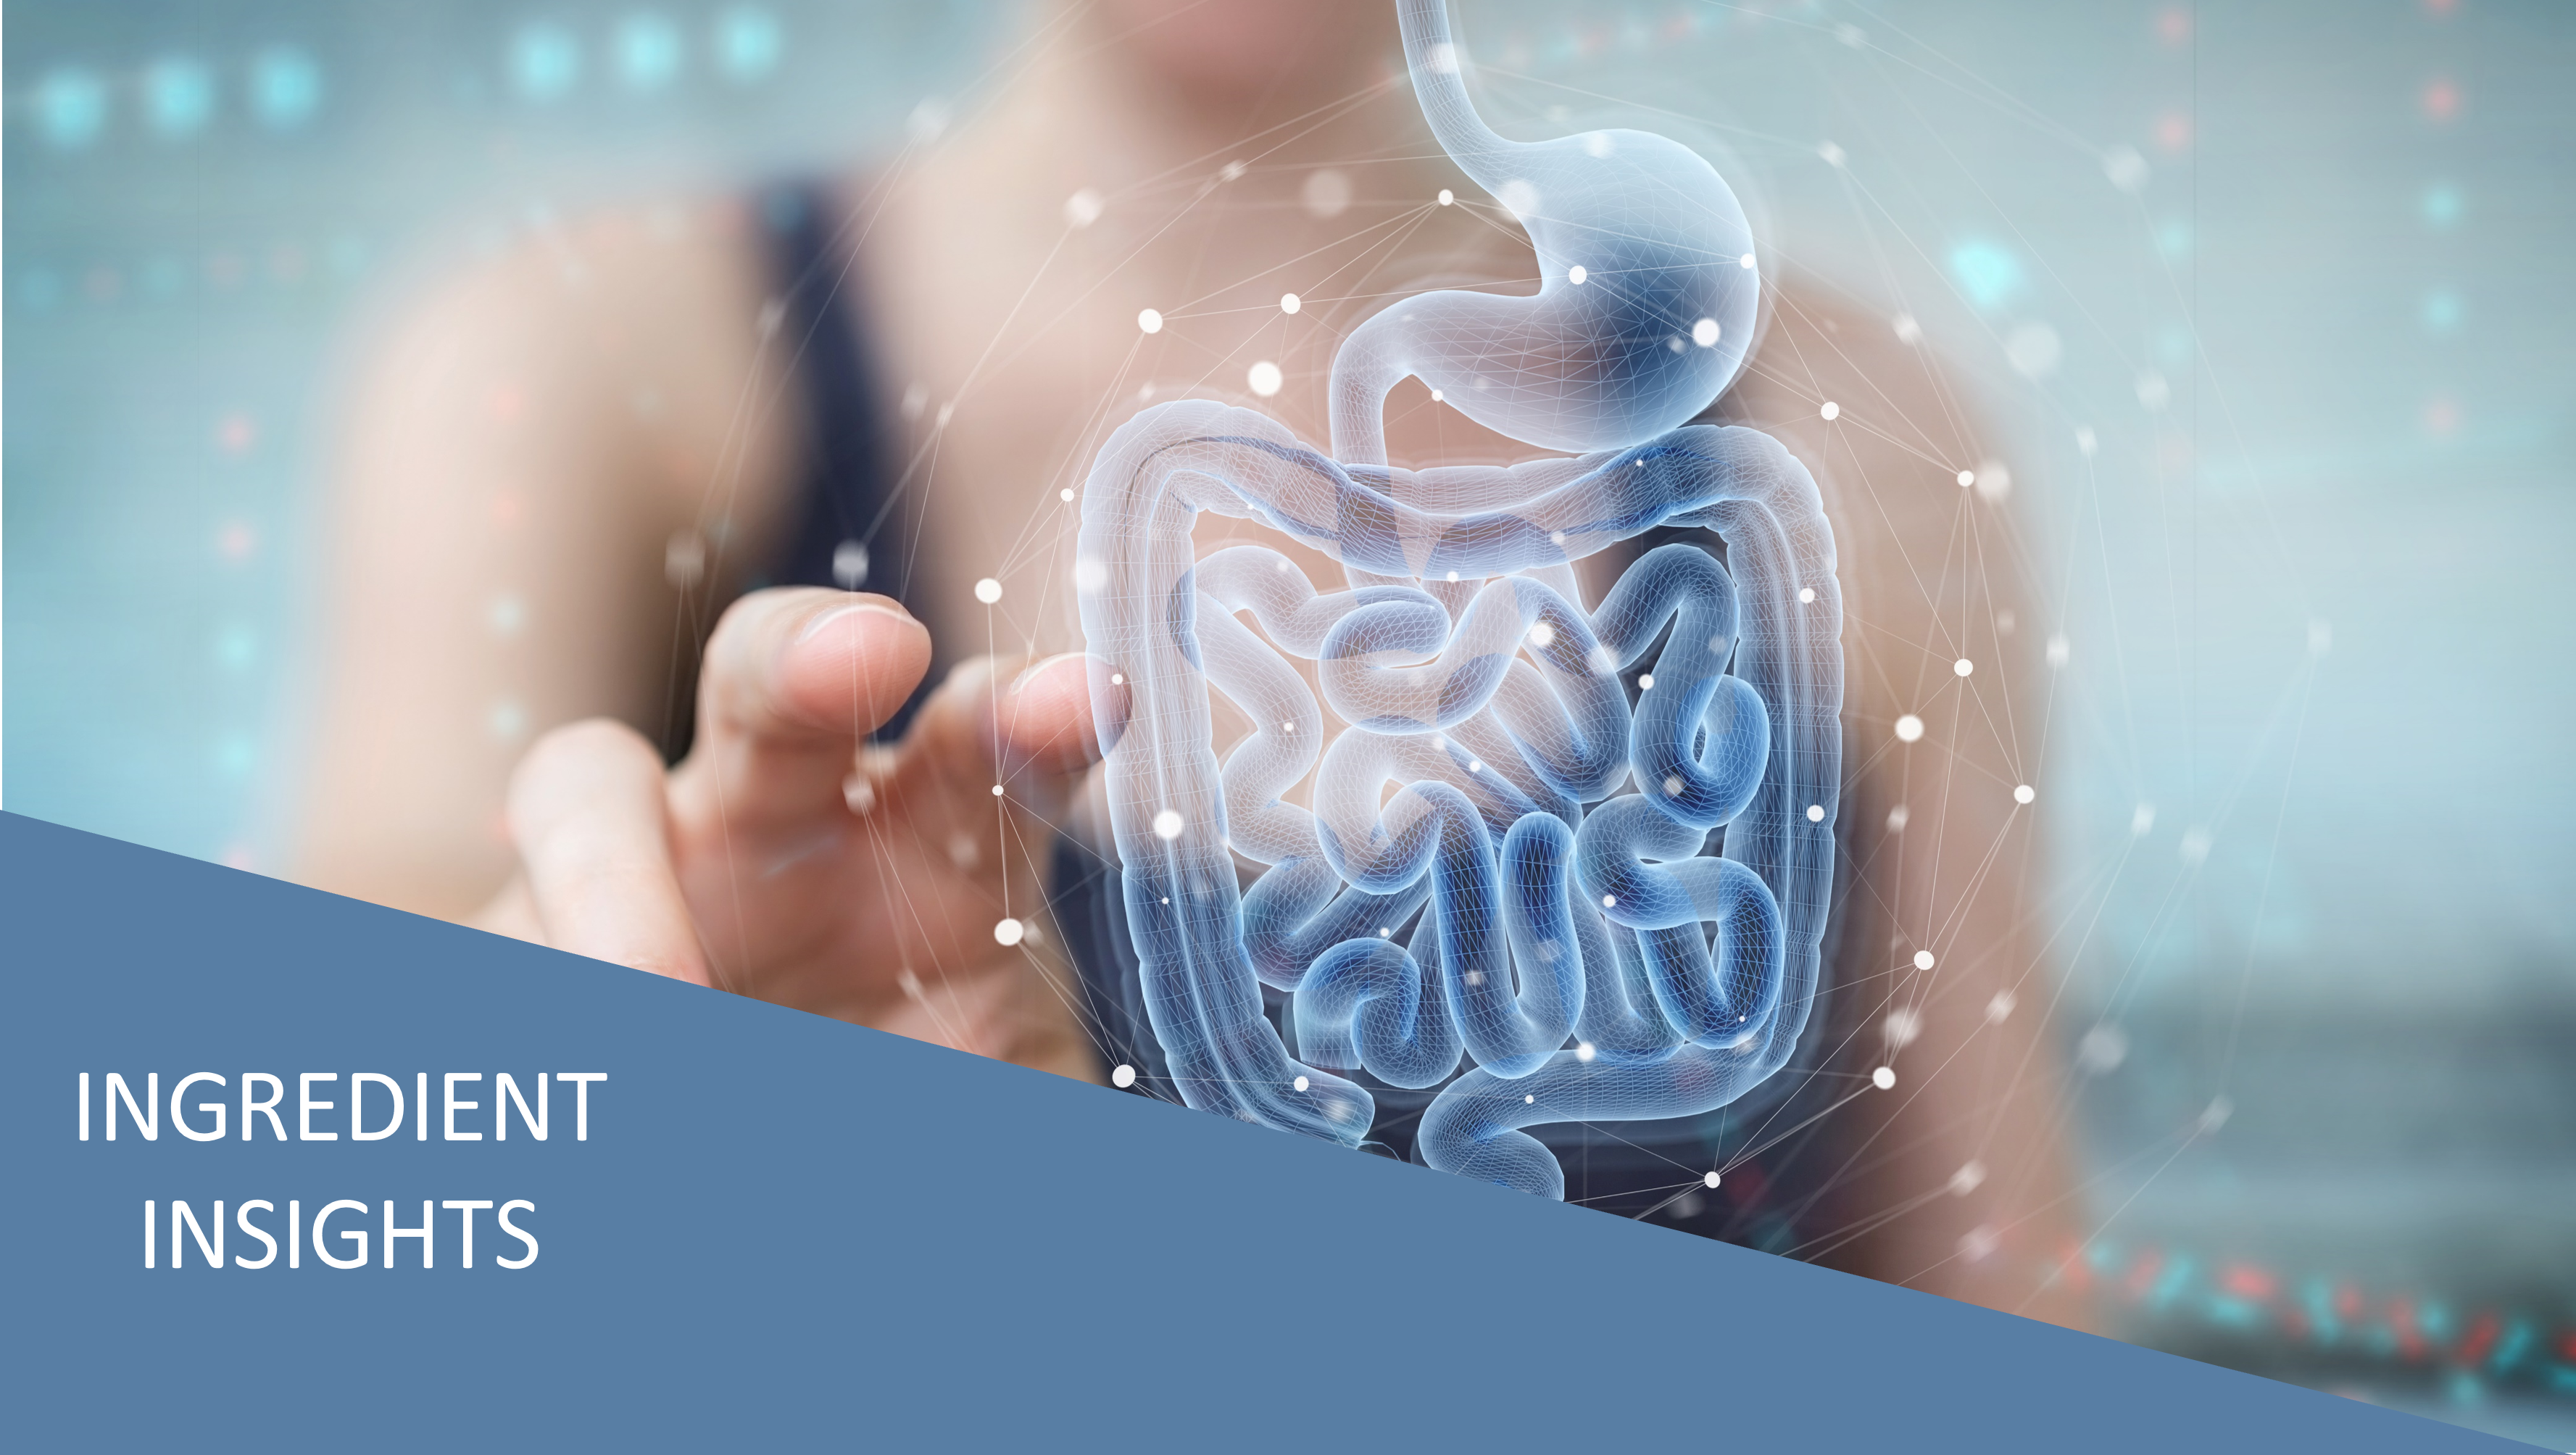 What’s Happening in the Gut?